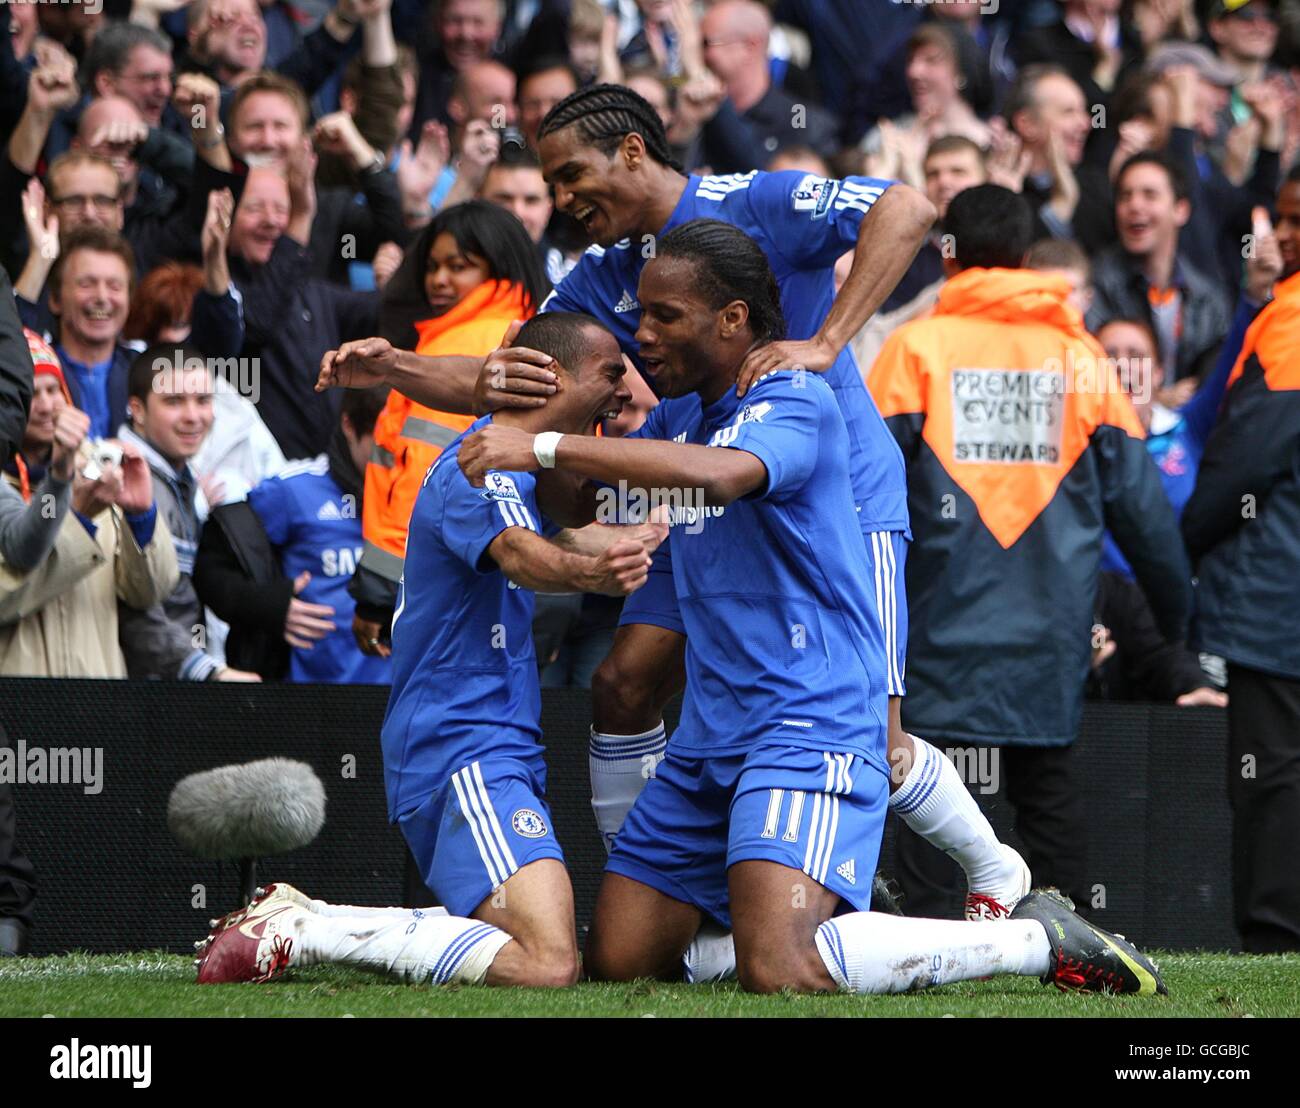 Soccer - Barclays Premier League - Chelsea v Wigan Athletic - Stamford Bridge. Chelsea's Ashley Cole (left) celebrates scoring with teammates Didier Drogba (right) and Florent Malouda (top) Stock Photo